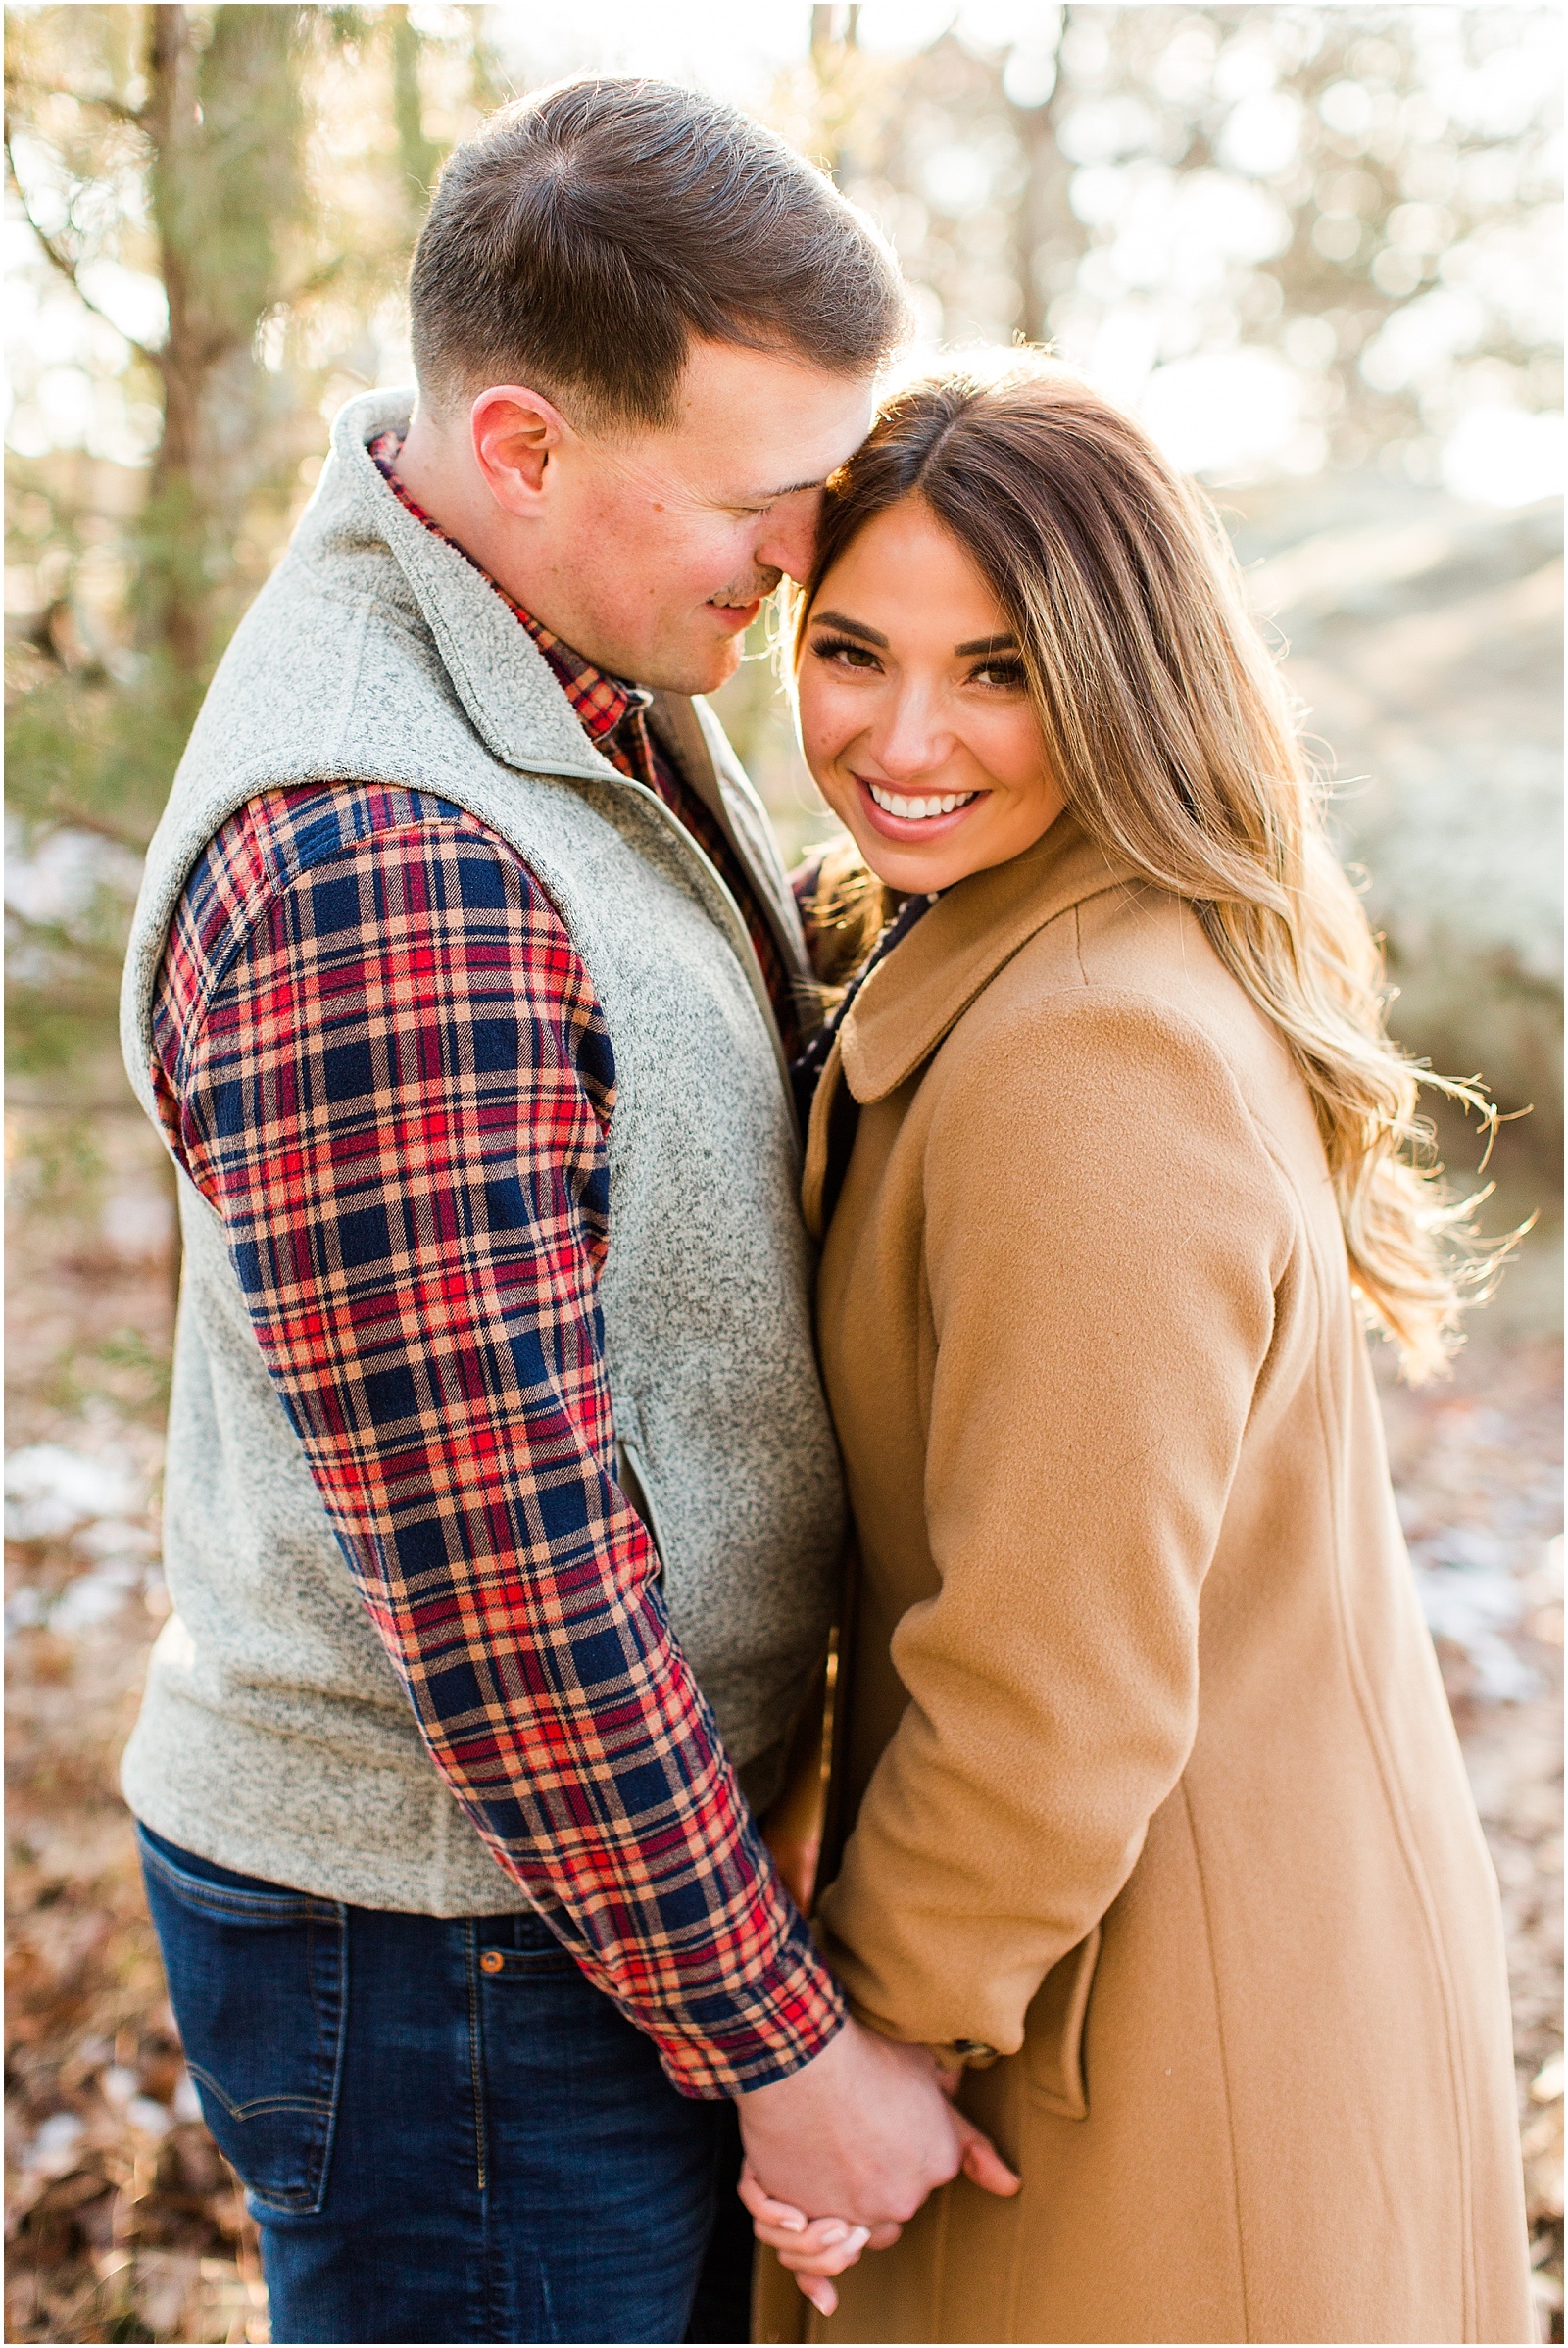 A Sunny Garden of the Gods Engagement Session | Shiloh and Lee | Bret and Brandie Photography031.jpg